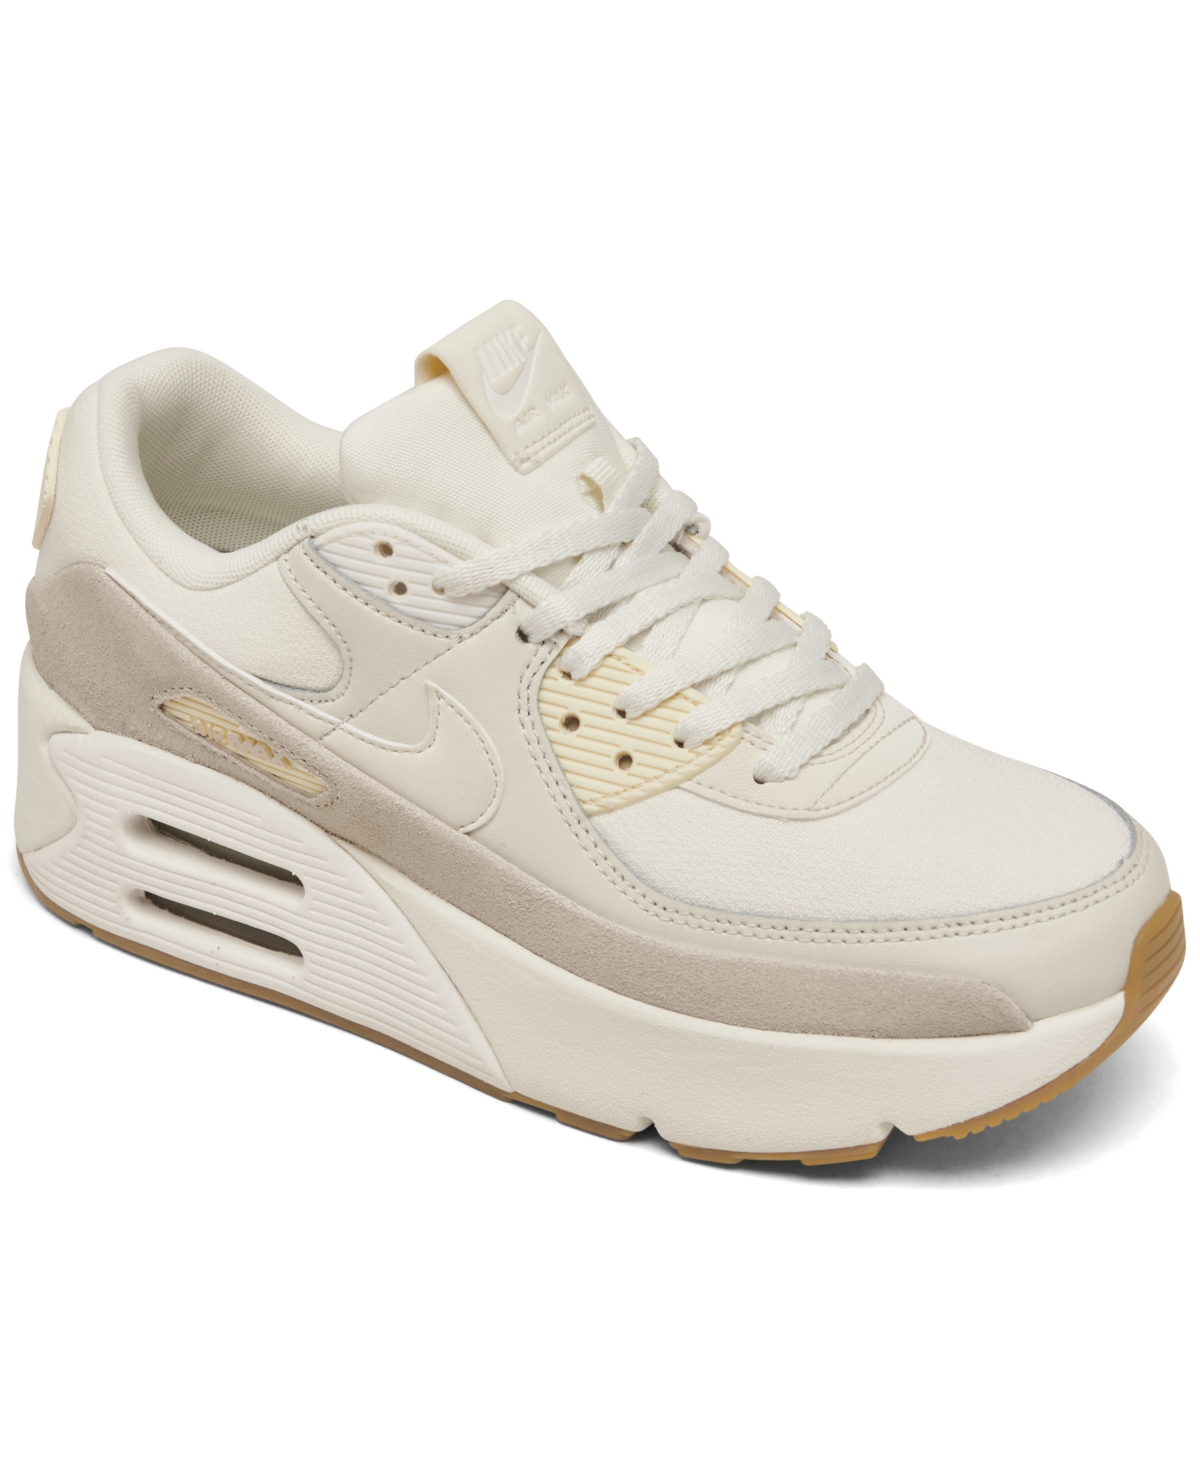 Women's Air Max LV8 Casual Sneakers from Finish Line - Beige